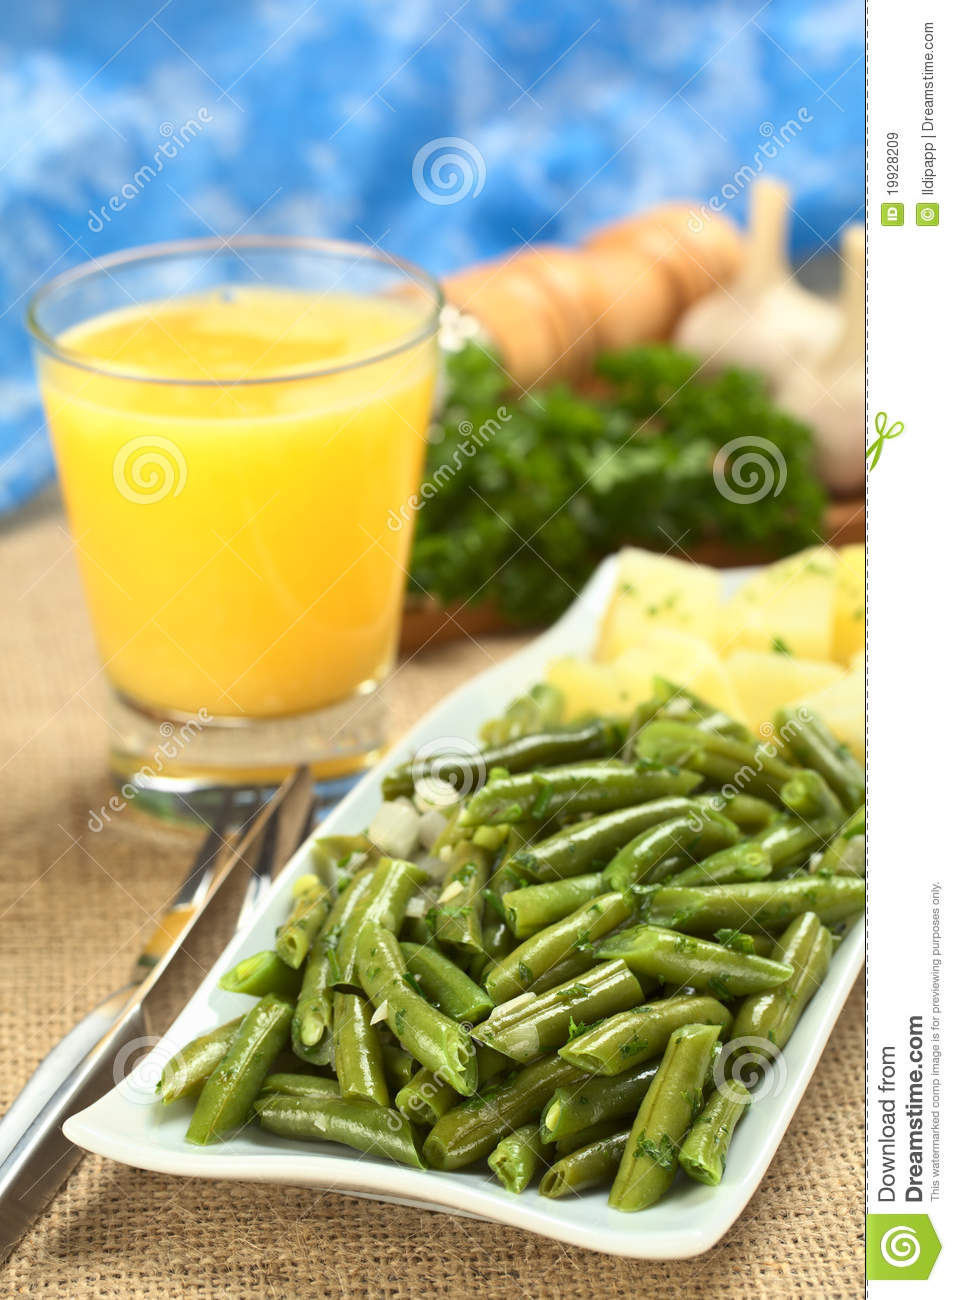 Cooked Green Beans With Onion And Parsley With Cooked Potato Orange    